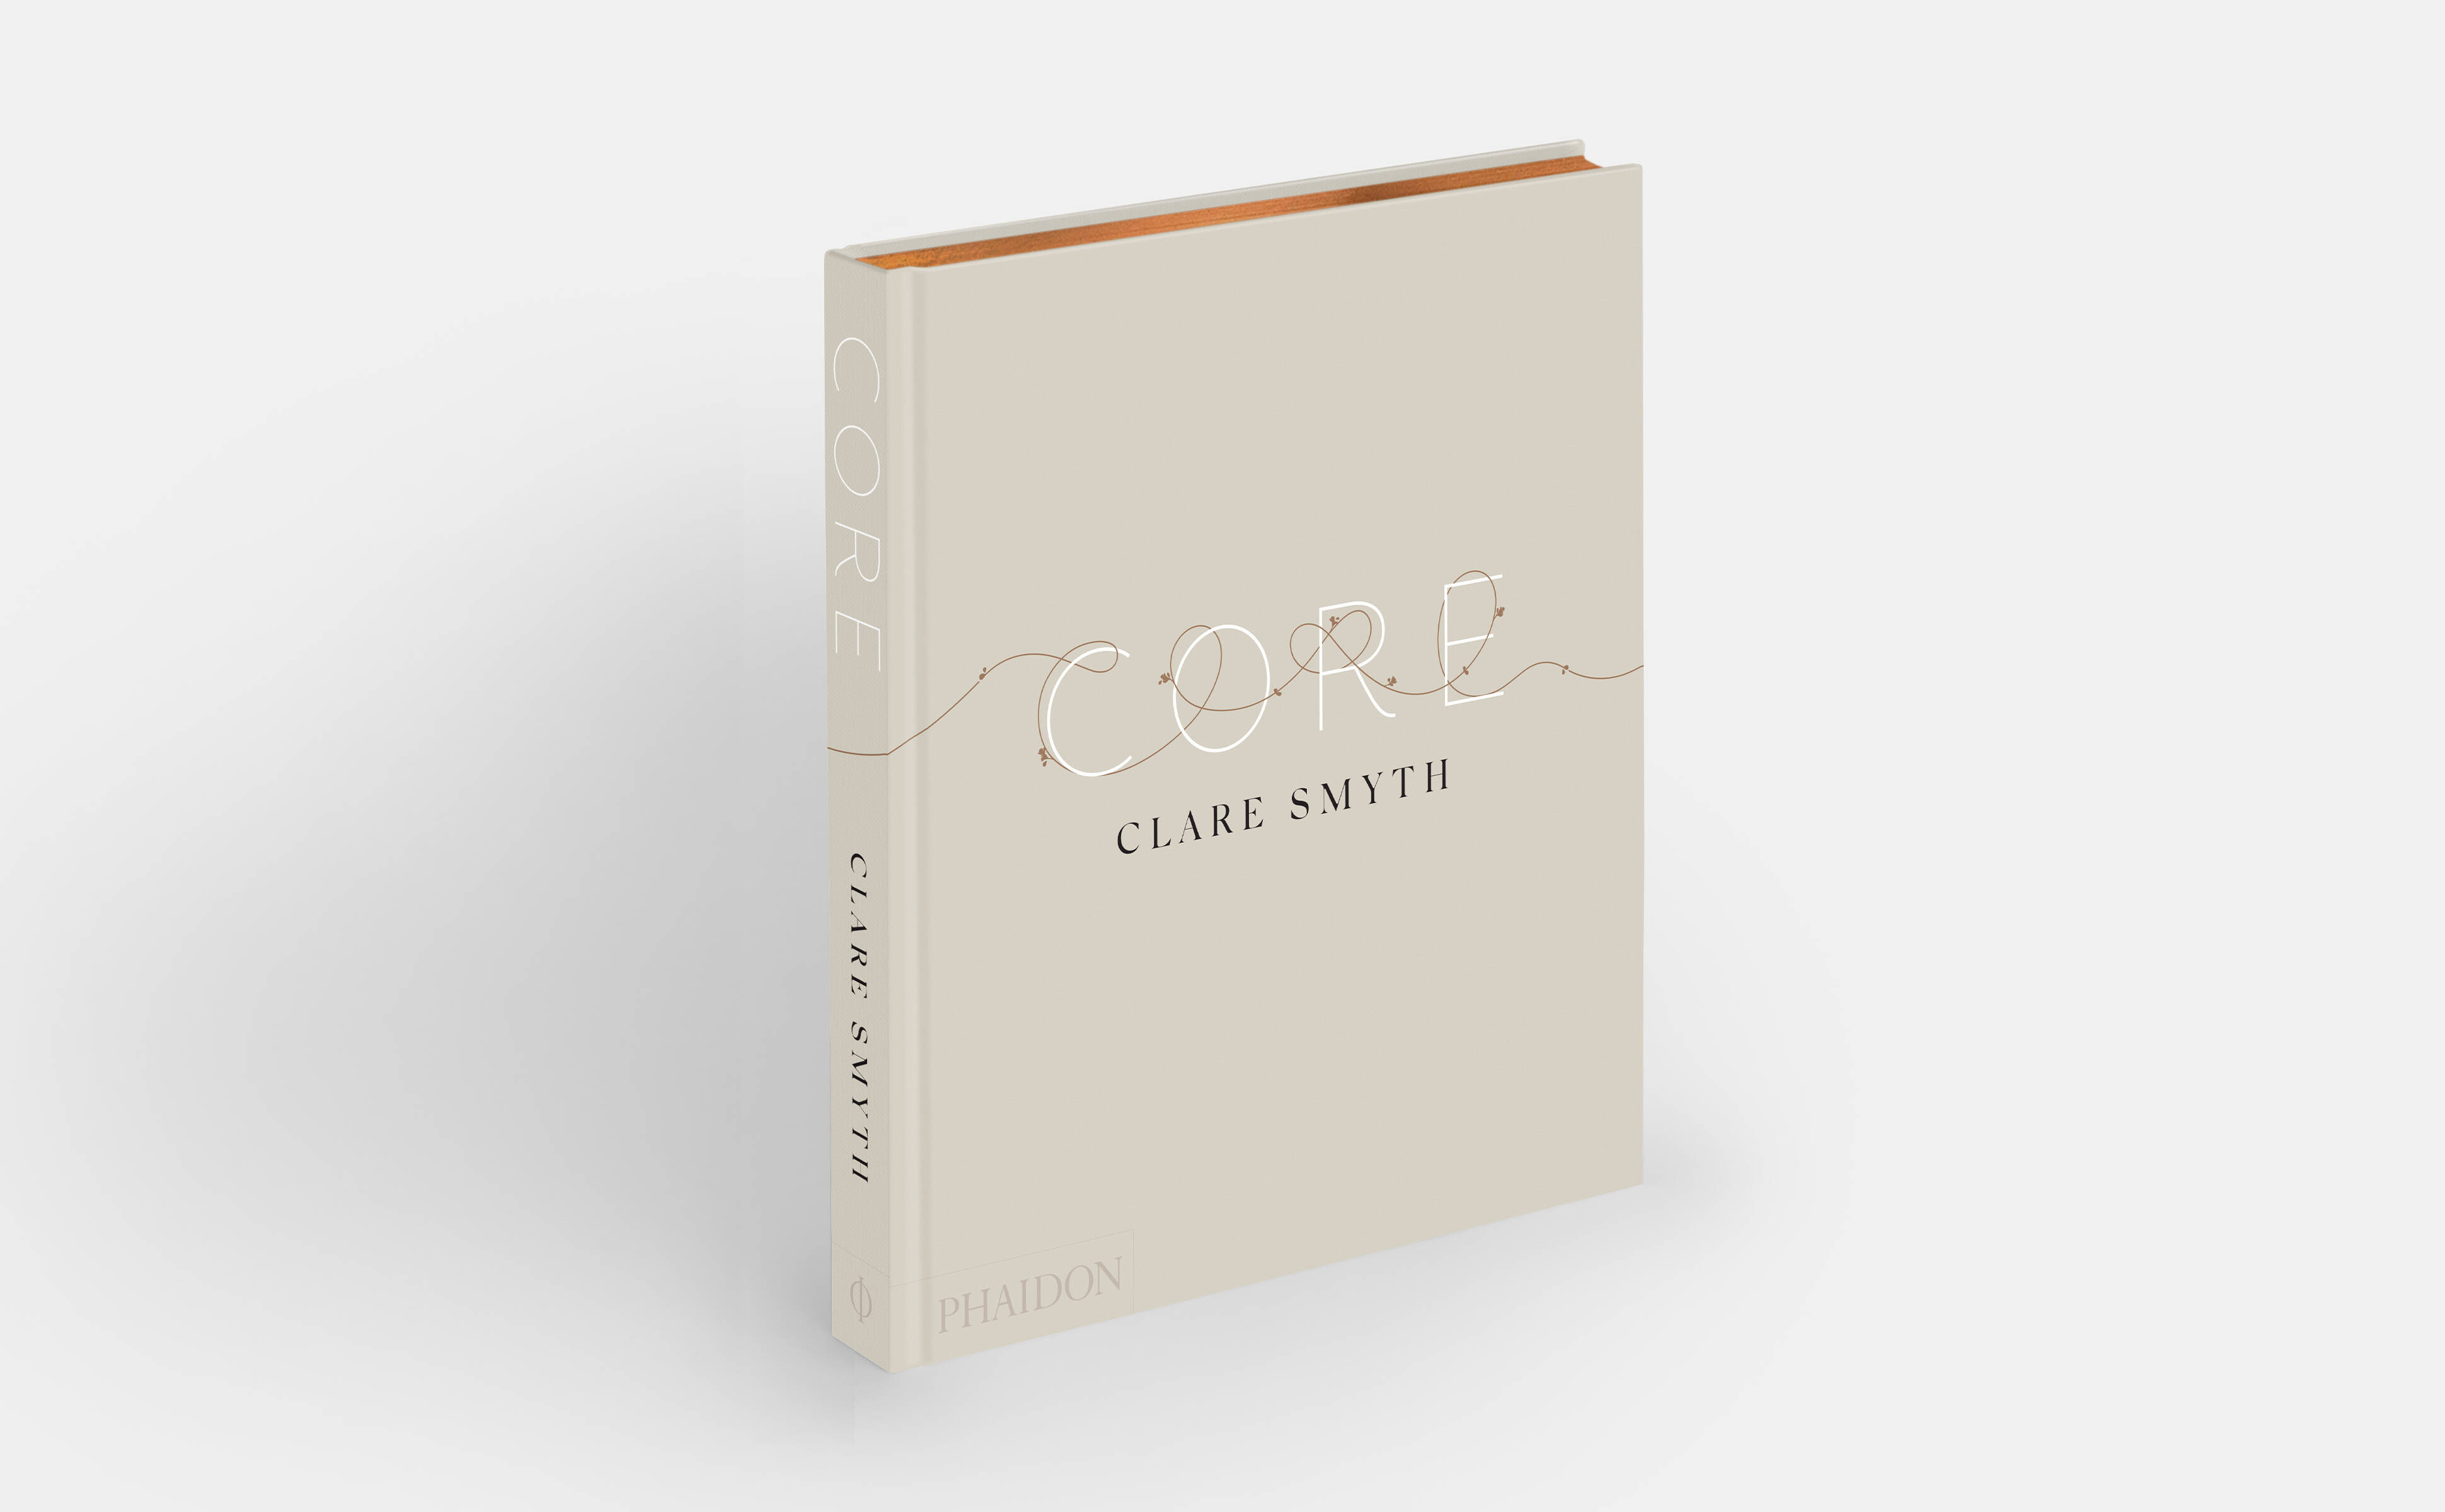 Discover how Core’s Clare Smyth built up her brigade of culinary all-stars